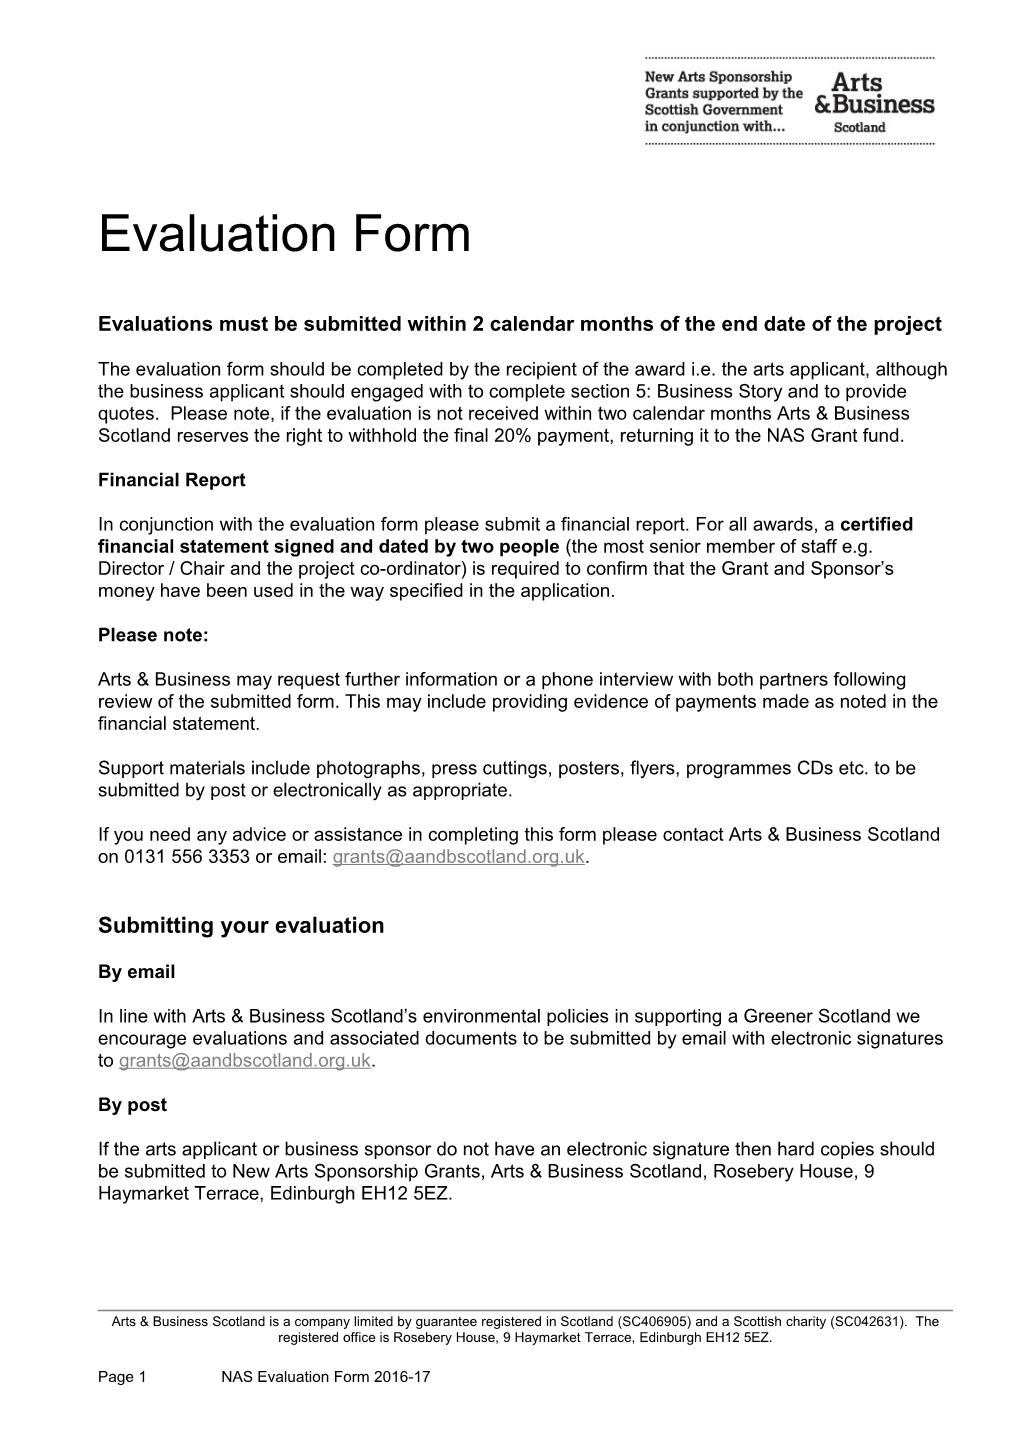 Evaluations Must Be Submitted Within 2 Calendar Months of the End Date of the Project